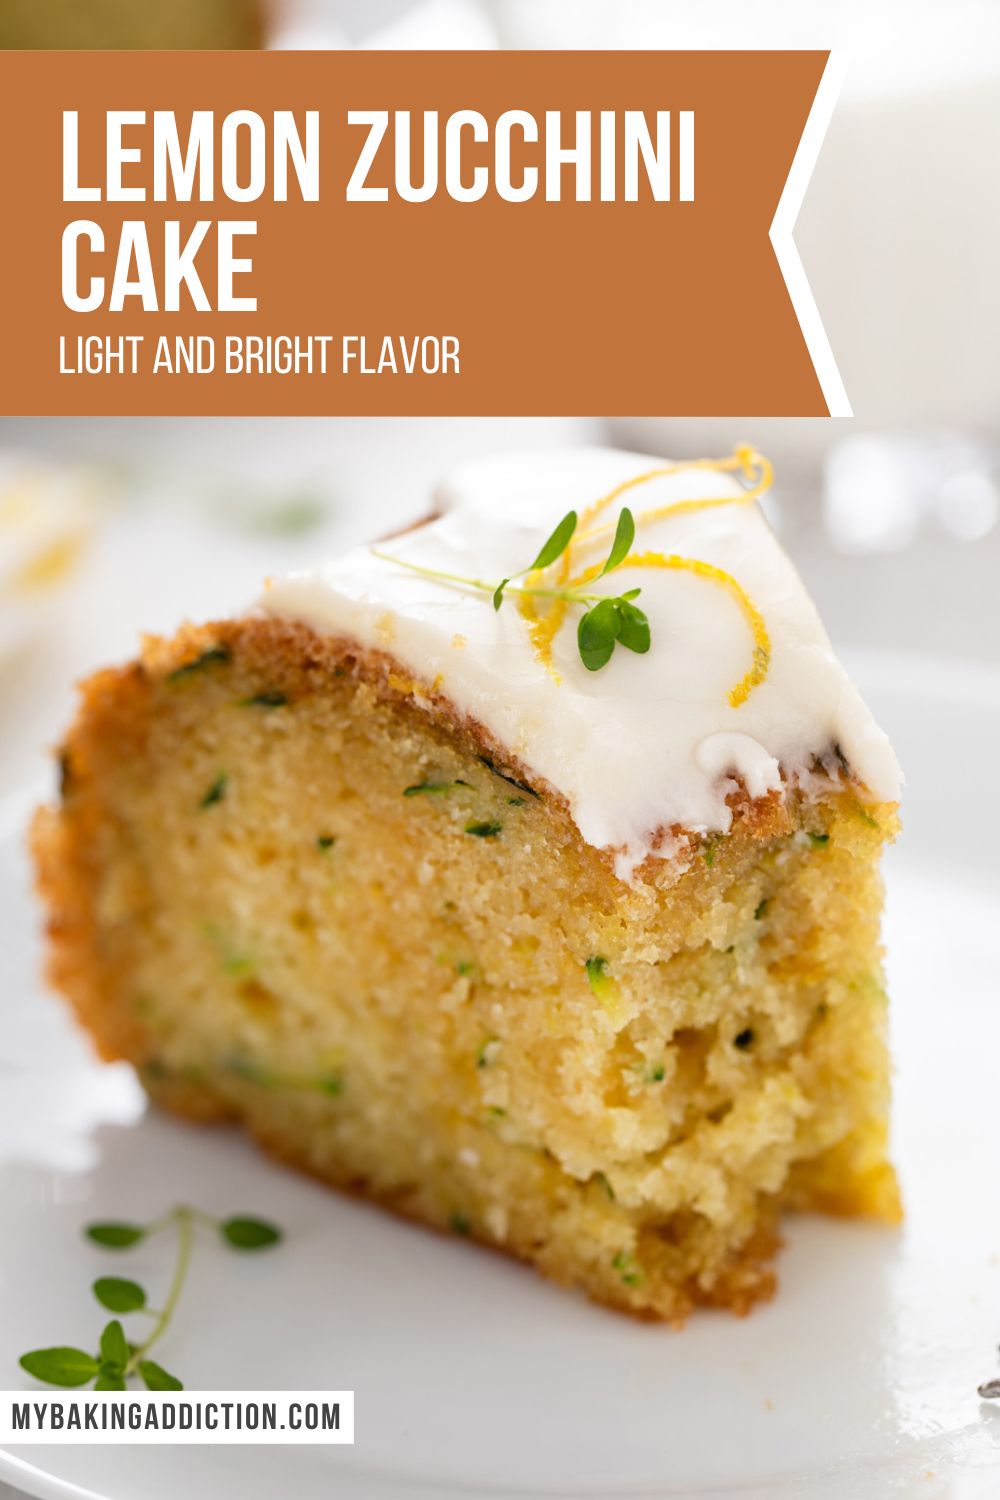 Slice of lemon zucchini cake with a bite taken from the end of it. text overlay includes recipe name.